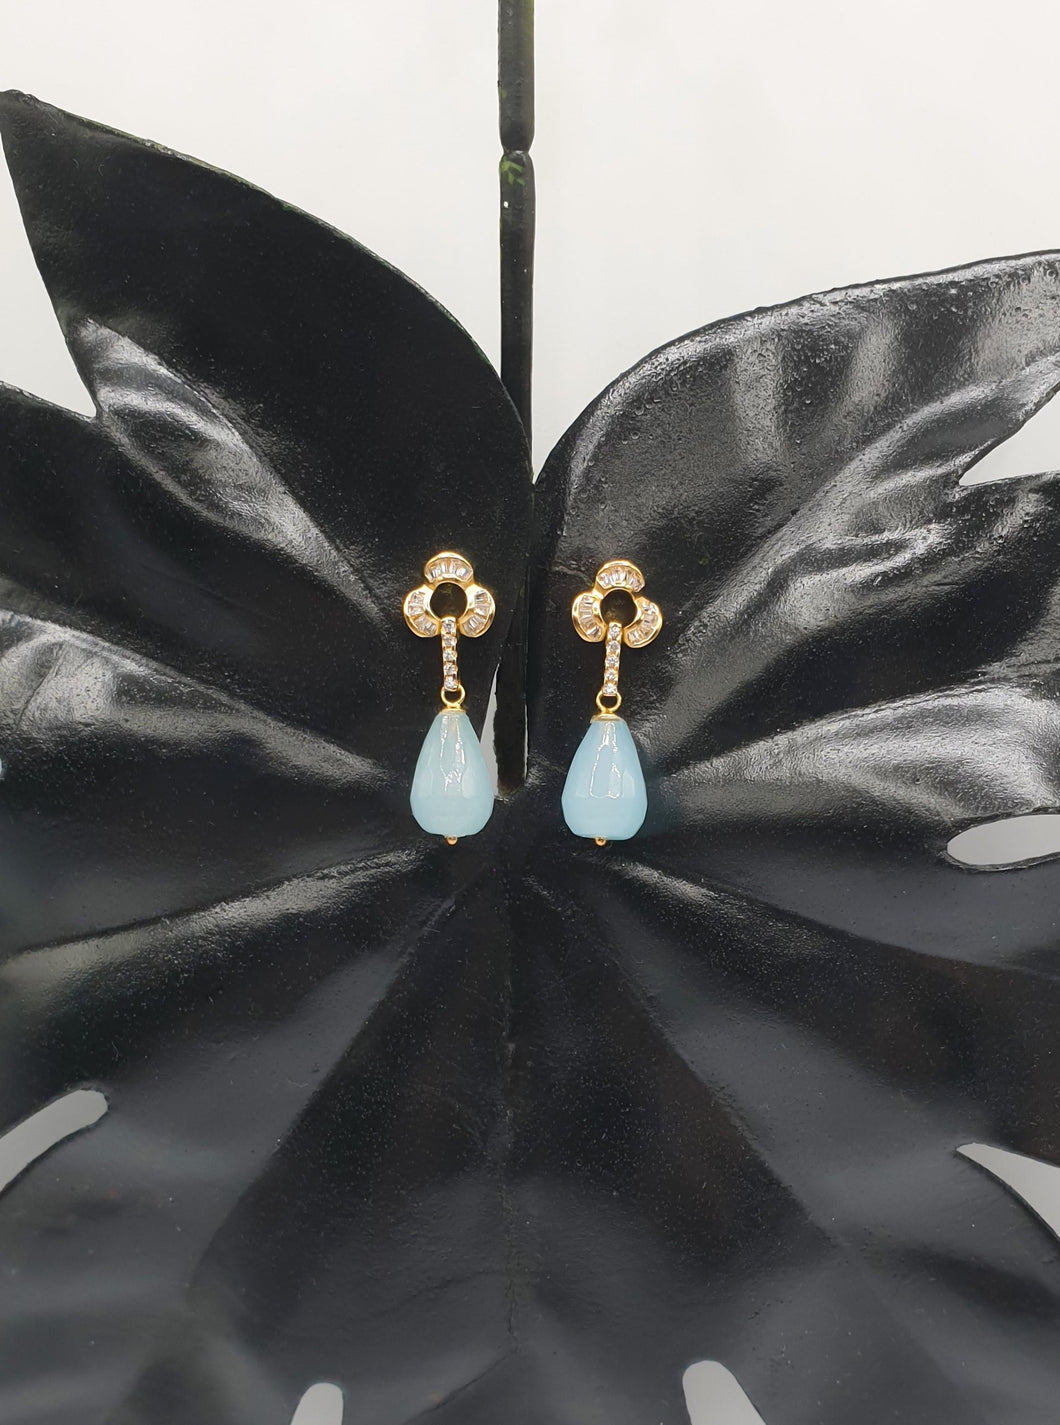 NEW golden stud earrings with dyed blue jade drops